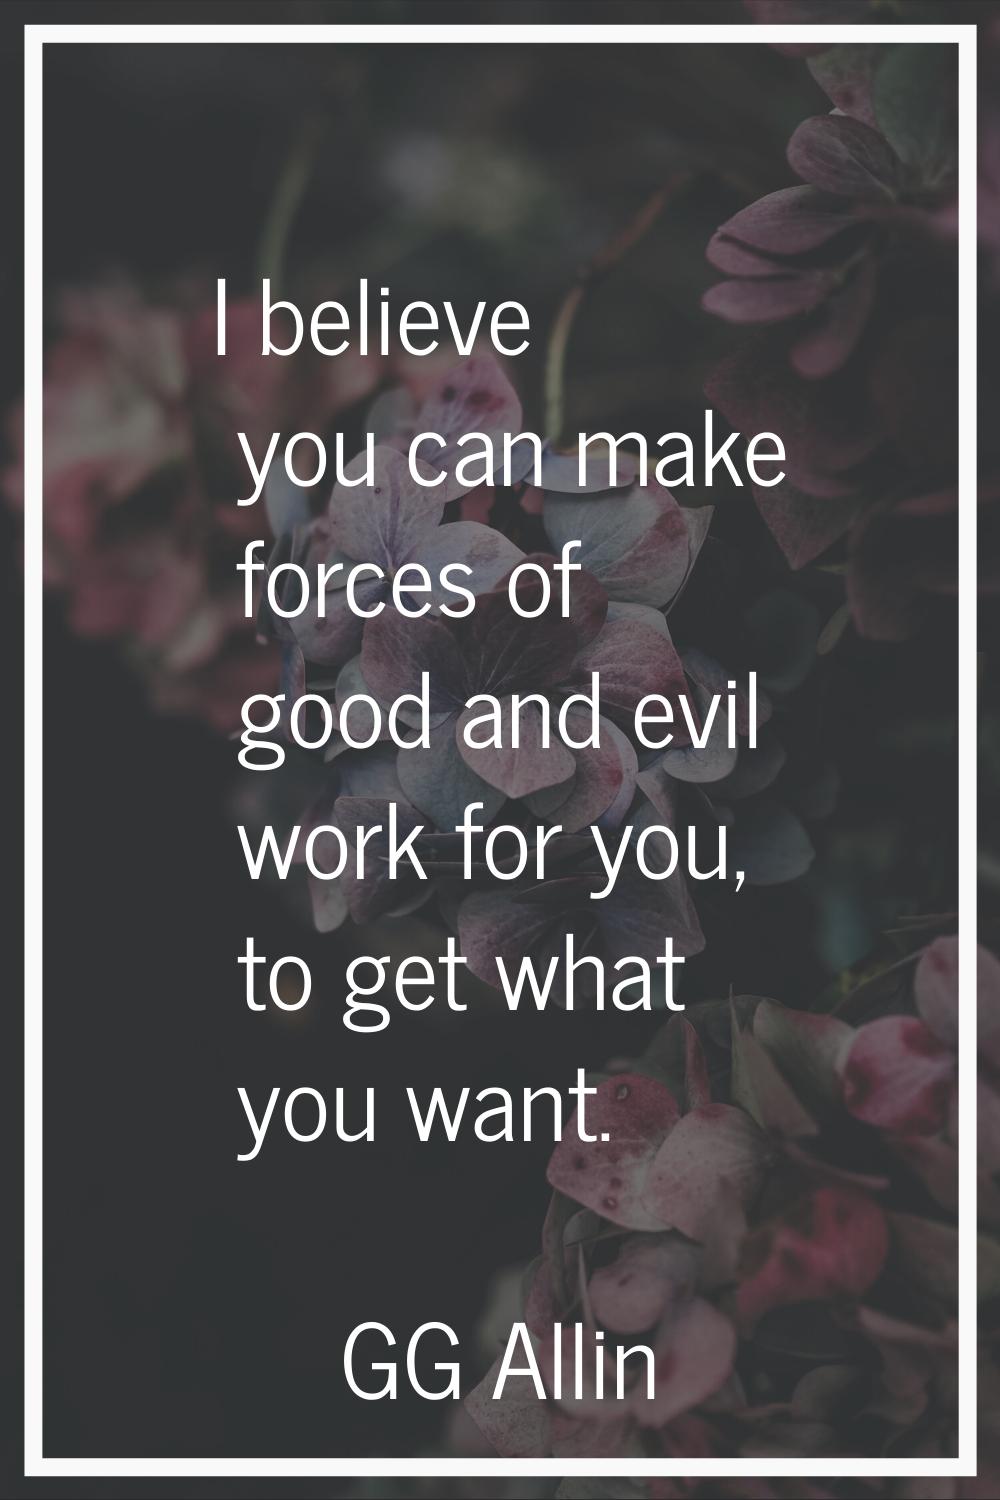 I believe you can make forces of good and evil work for you, to get what you want.